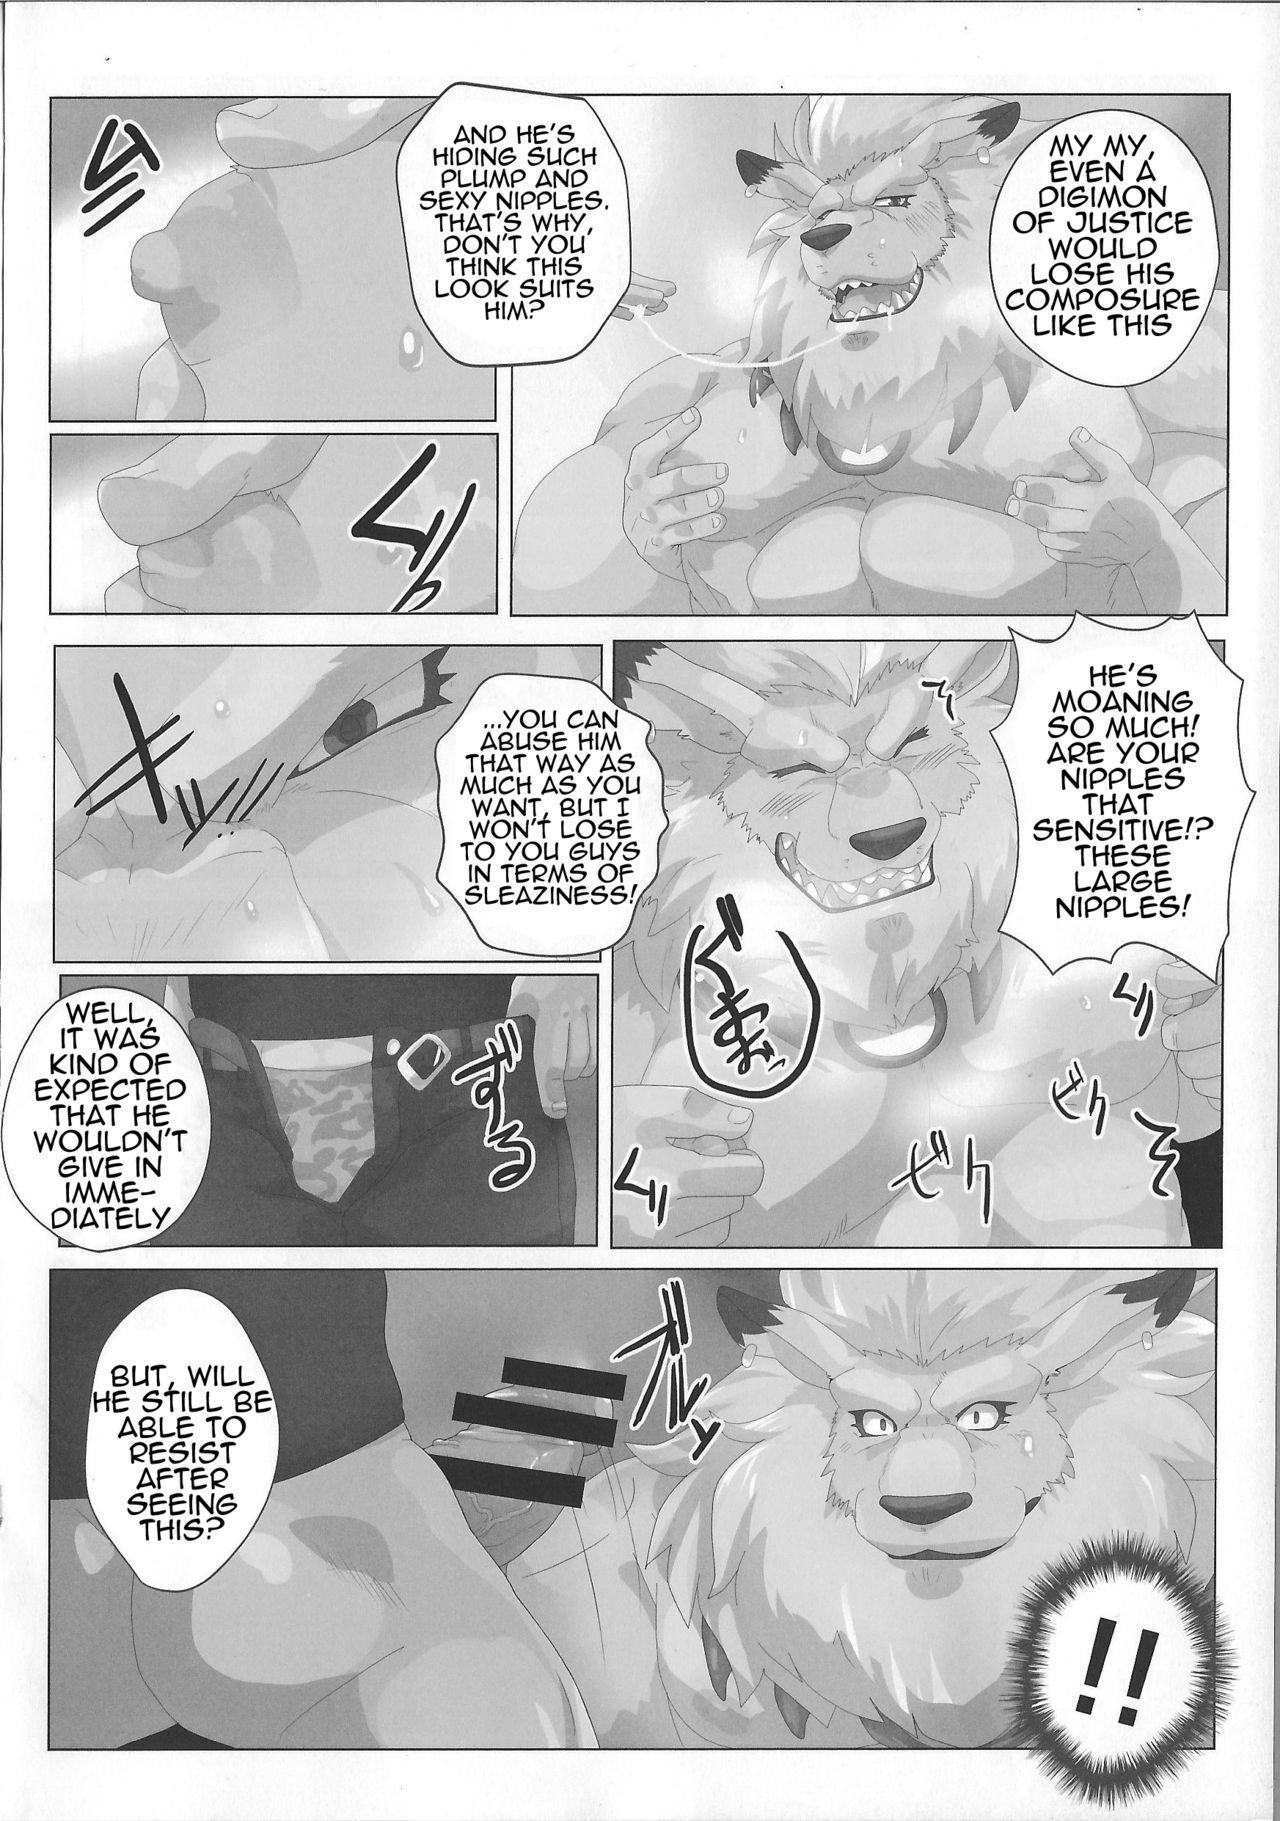 [Debirobu] For the Lion-Man Type Electric Life Form to Overturn Fate - Leomon Doujin [ENG] 9